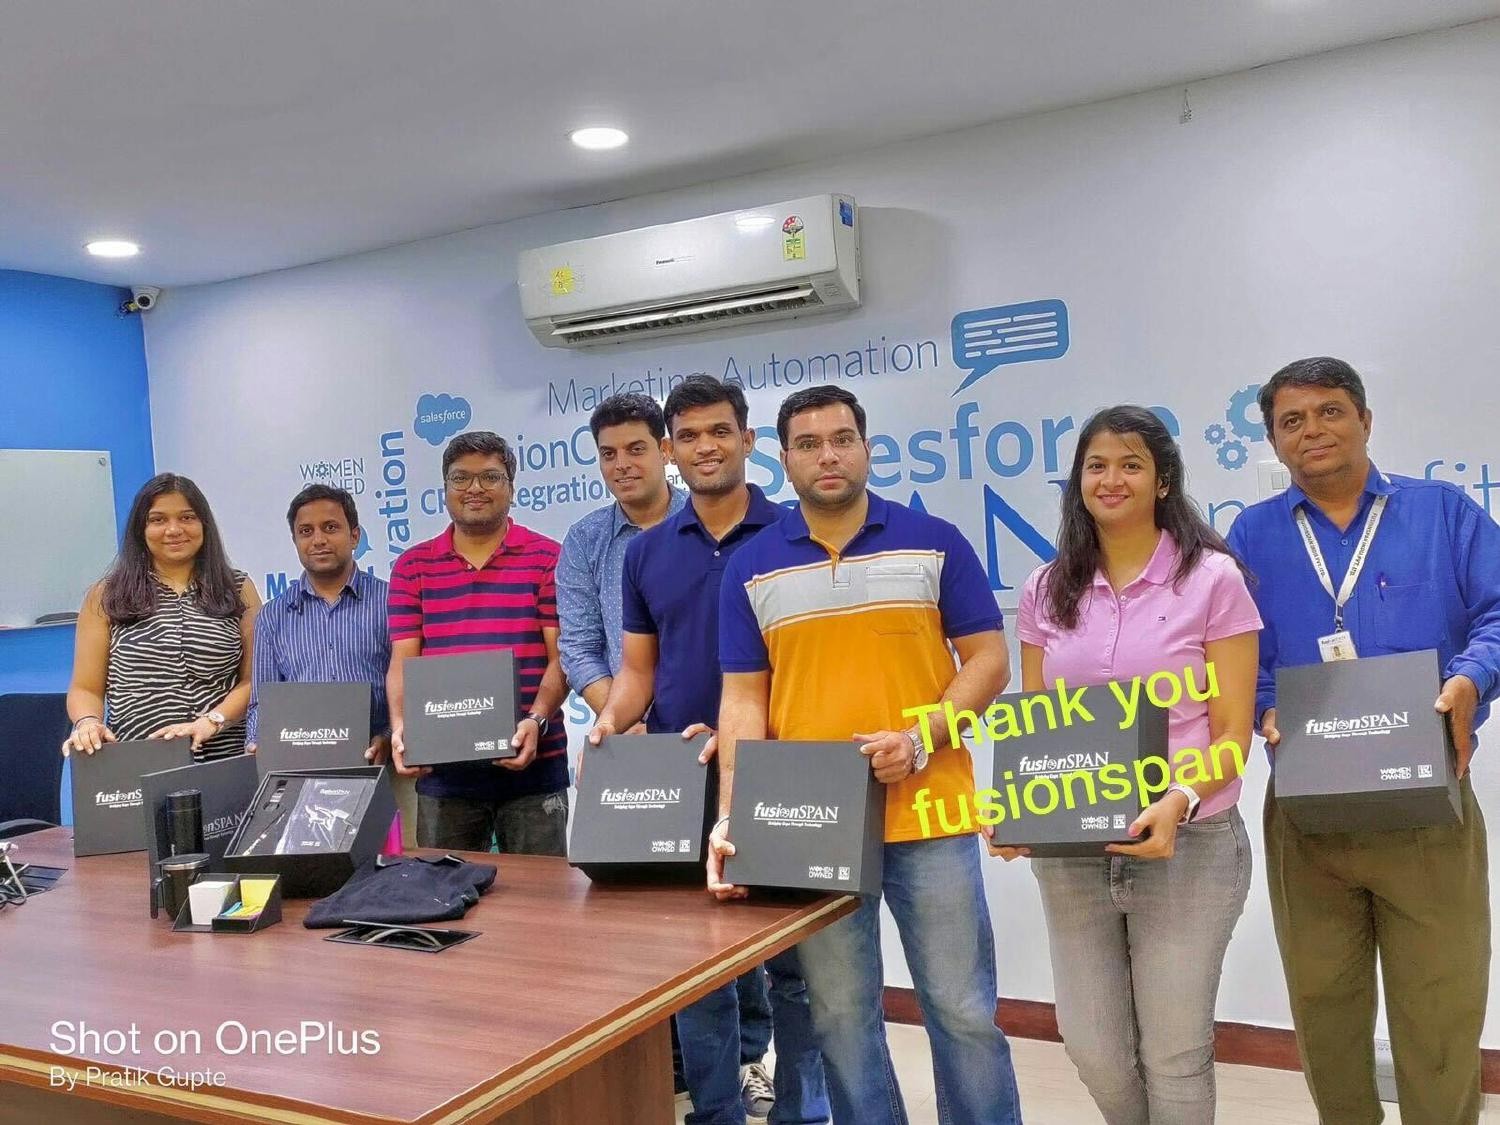 fusionSpan swag for our teammates in Nagpur, India!